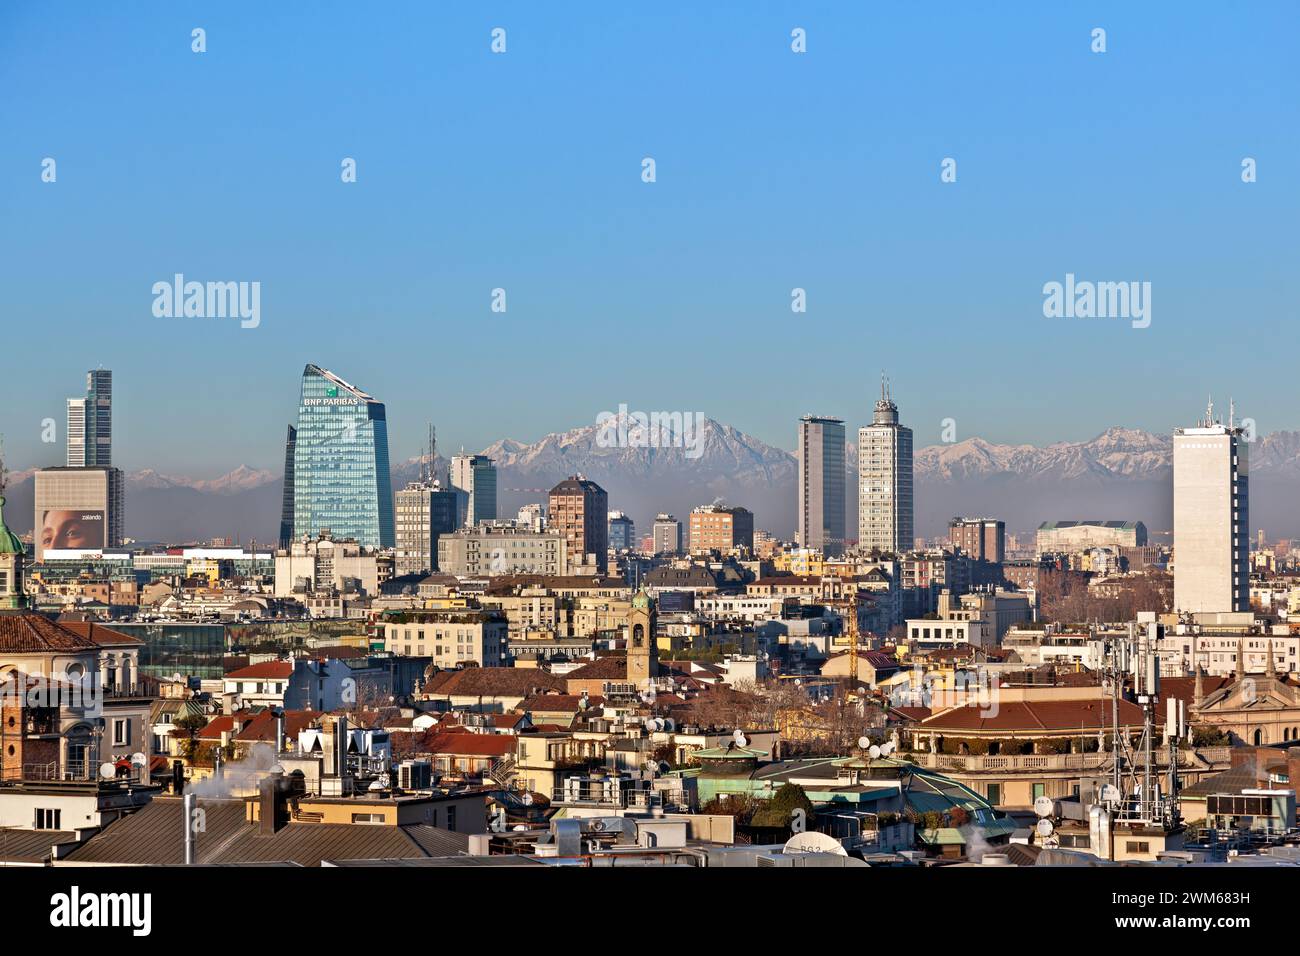 Skyline of Milan city with the Alps Mountains at the background, as seen from the rooftop of the Duomo, the Cathedral of Milan, in Italy, Europe. Stock Photo